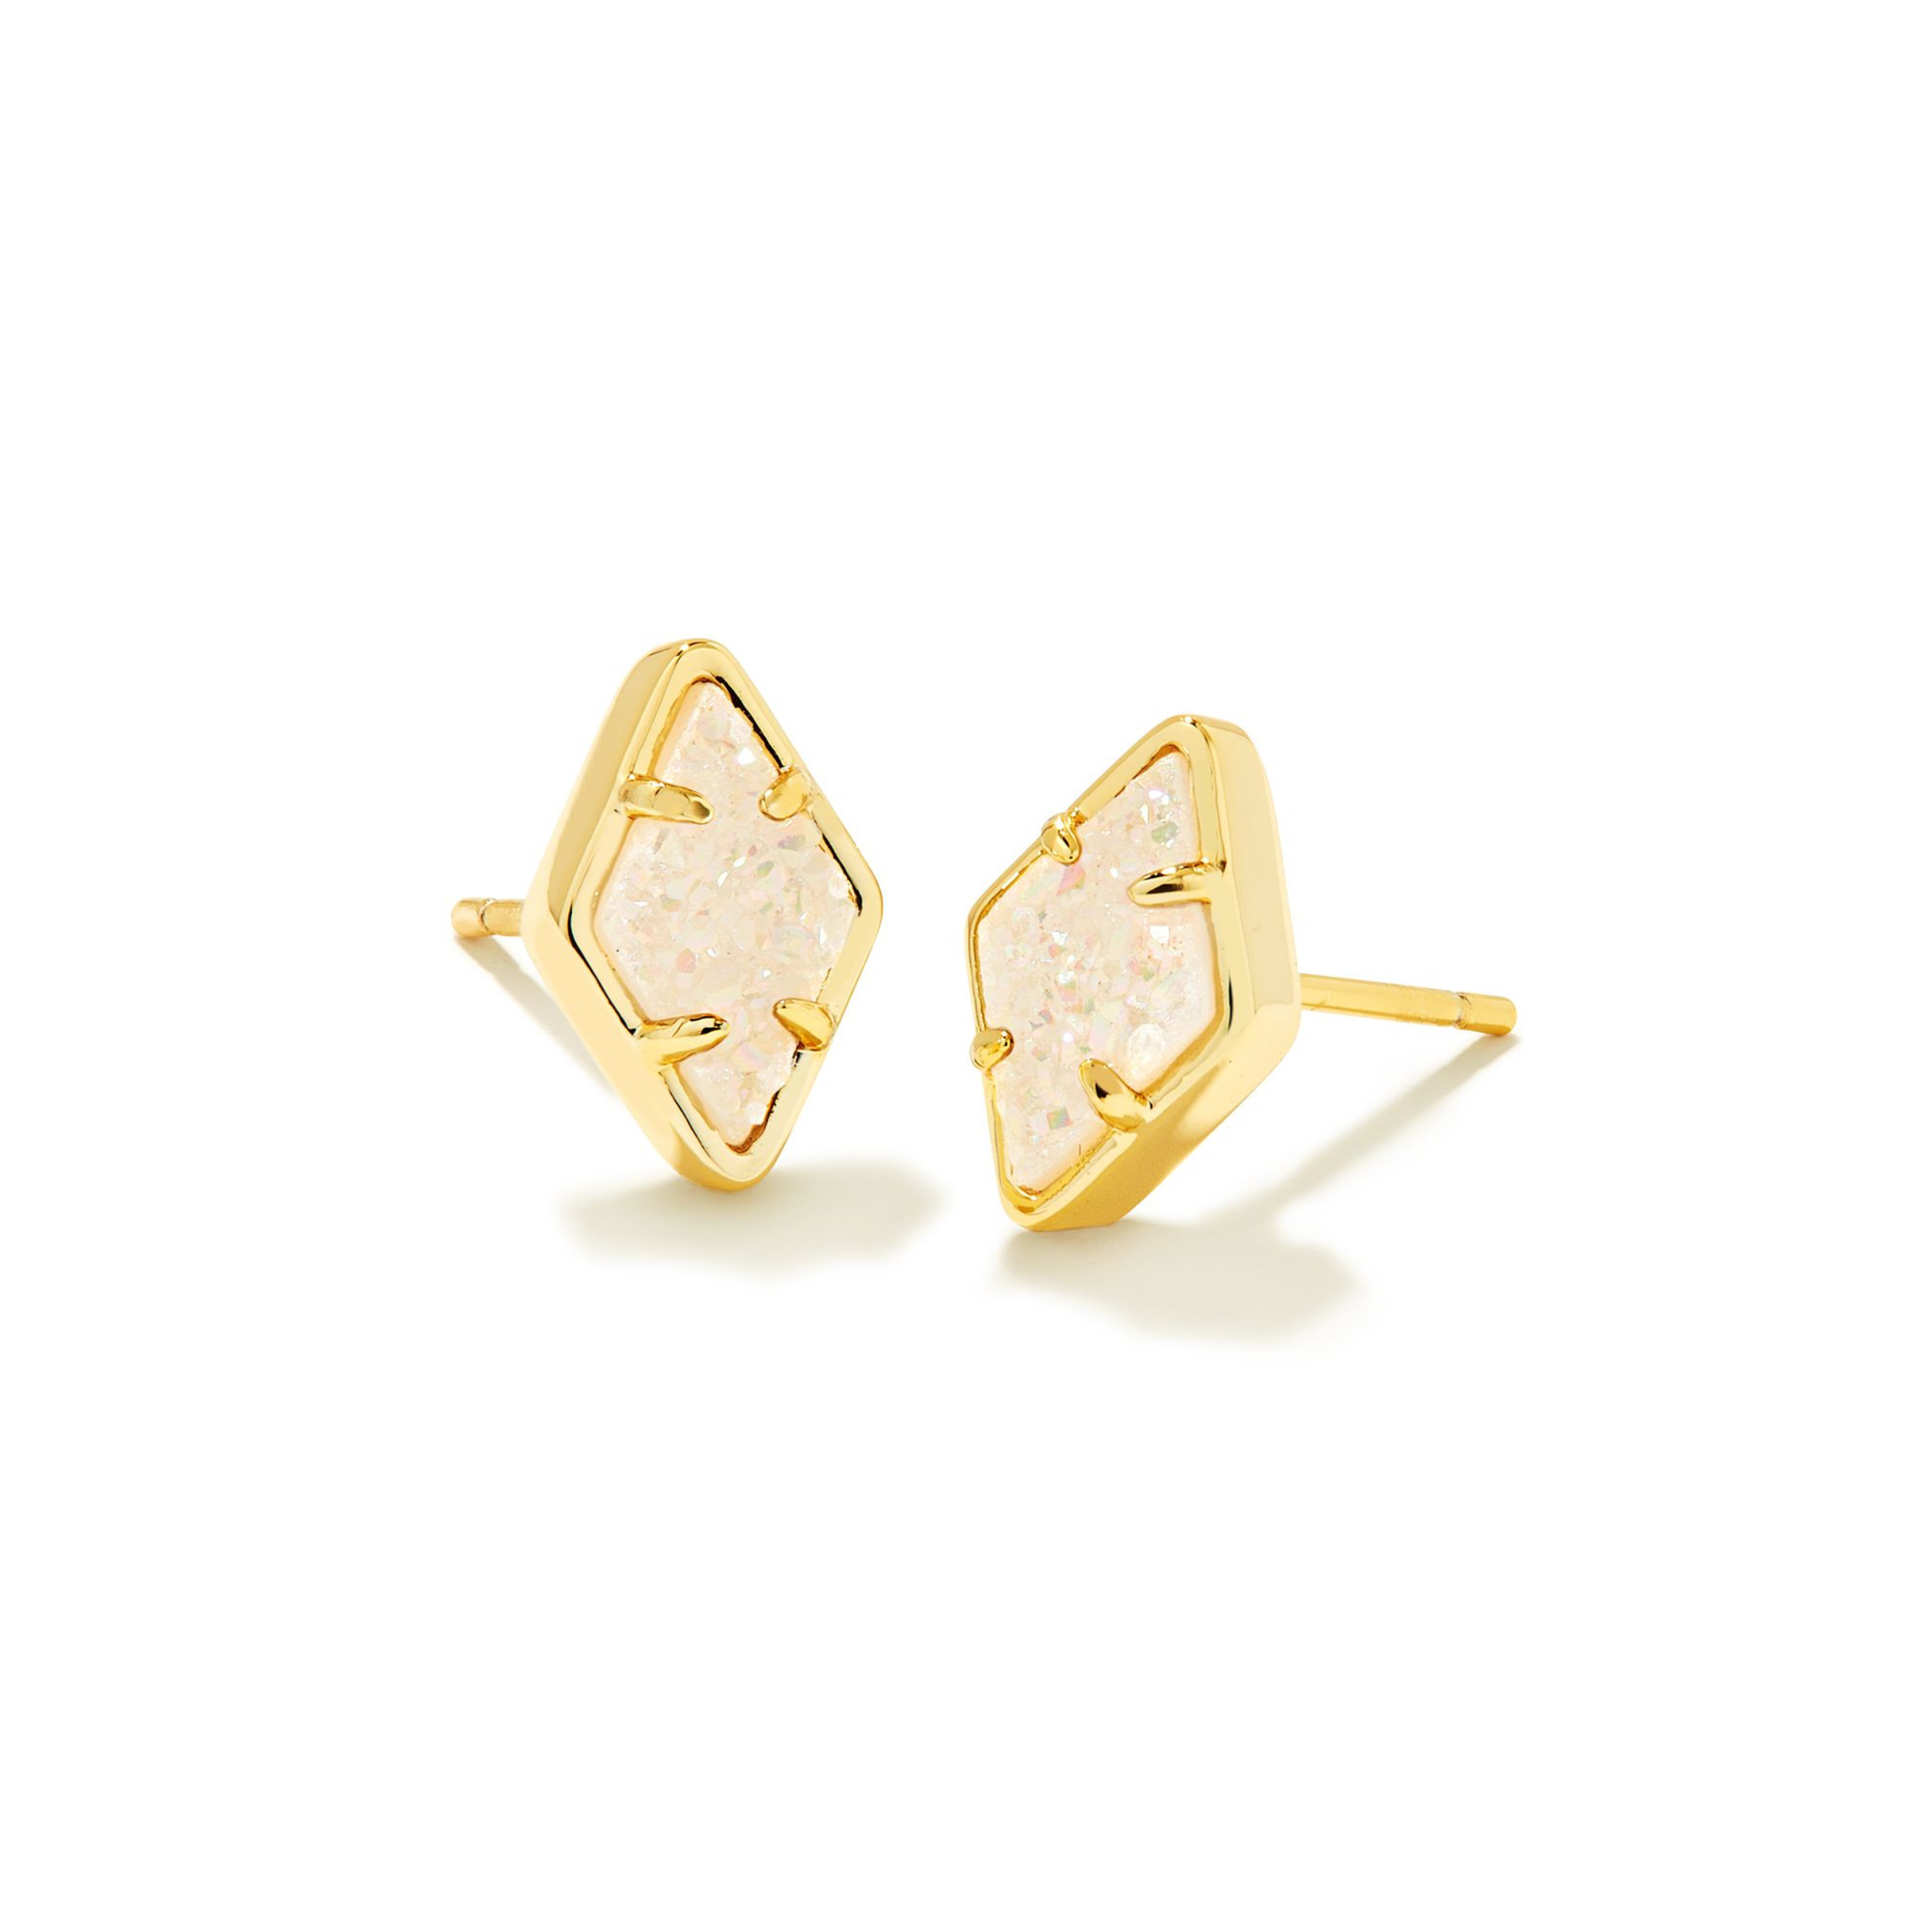 Kendra Scott | Kinsley Gold Stud Earrings in Iridescent Drusy - Giddy Up Glamour Boutique